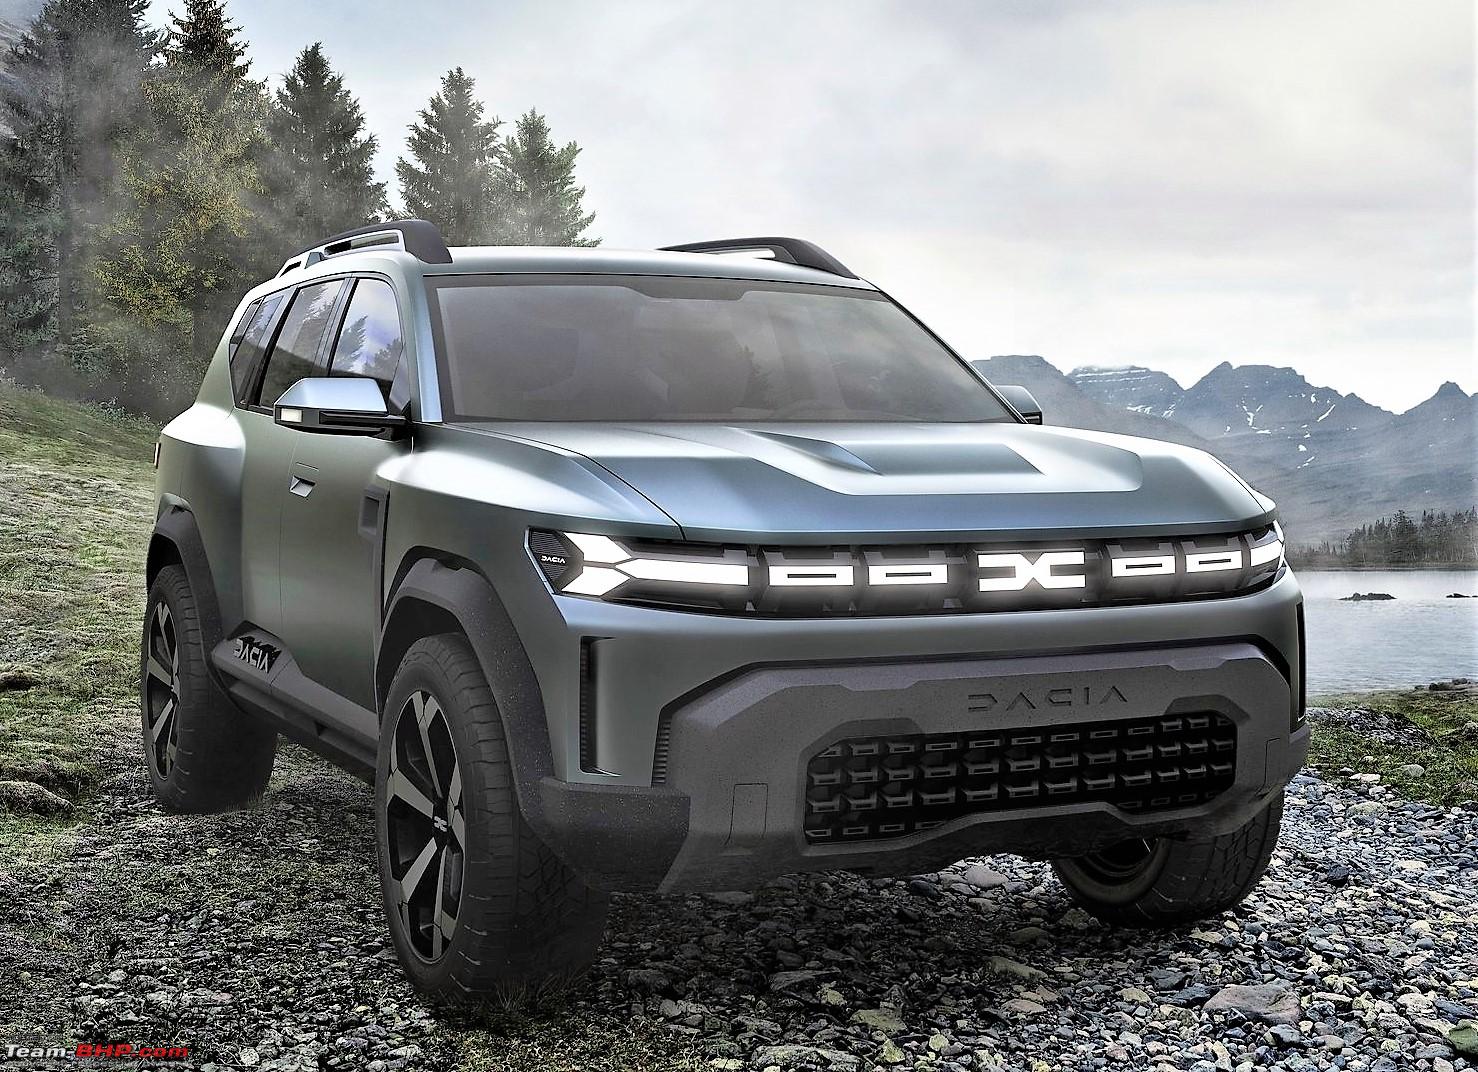 Renault Duster to make a comeback in India? - Team-BHP